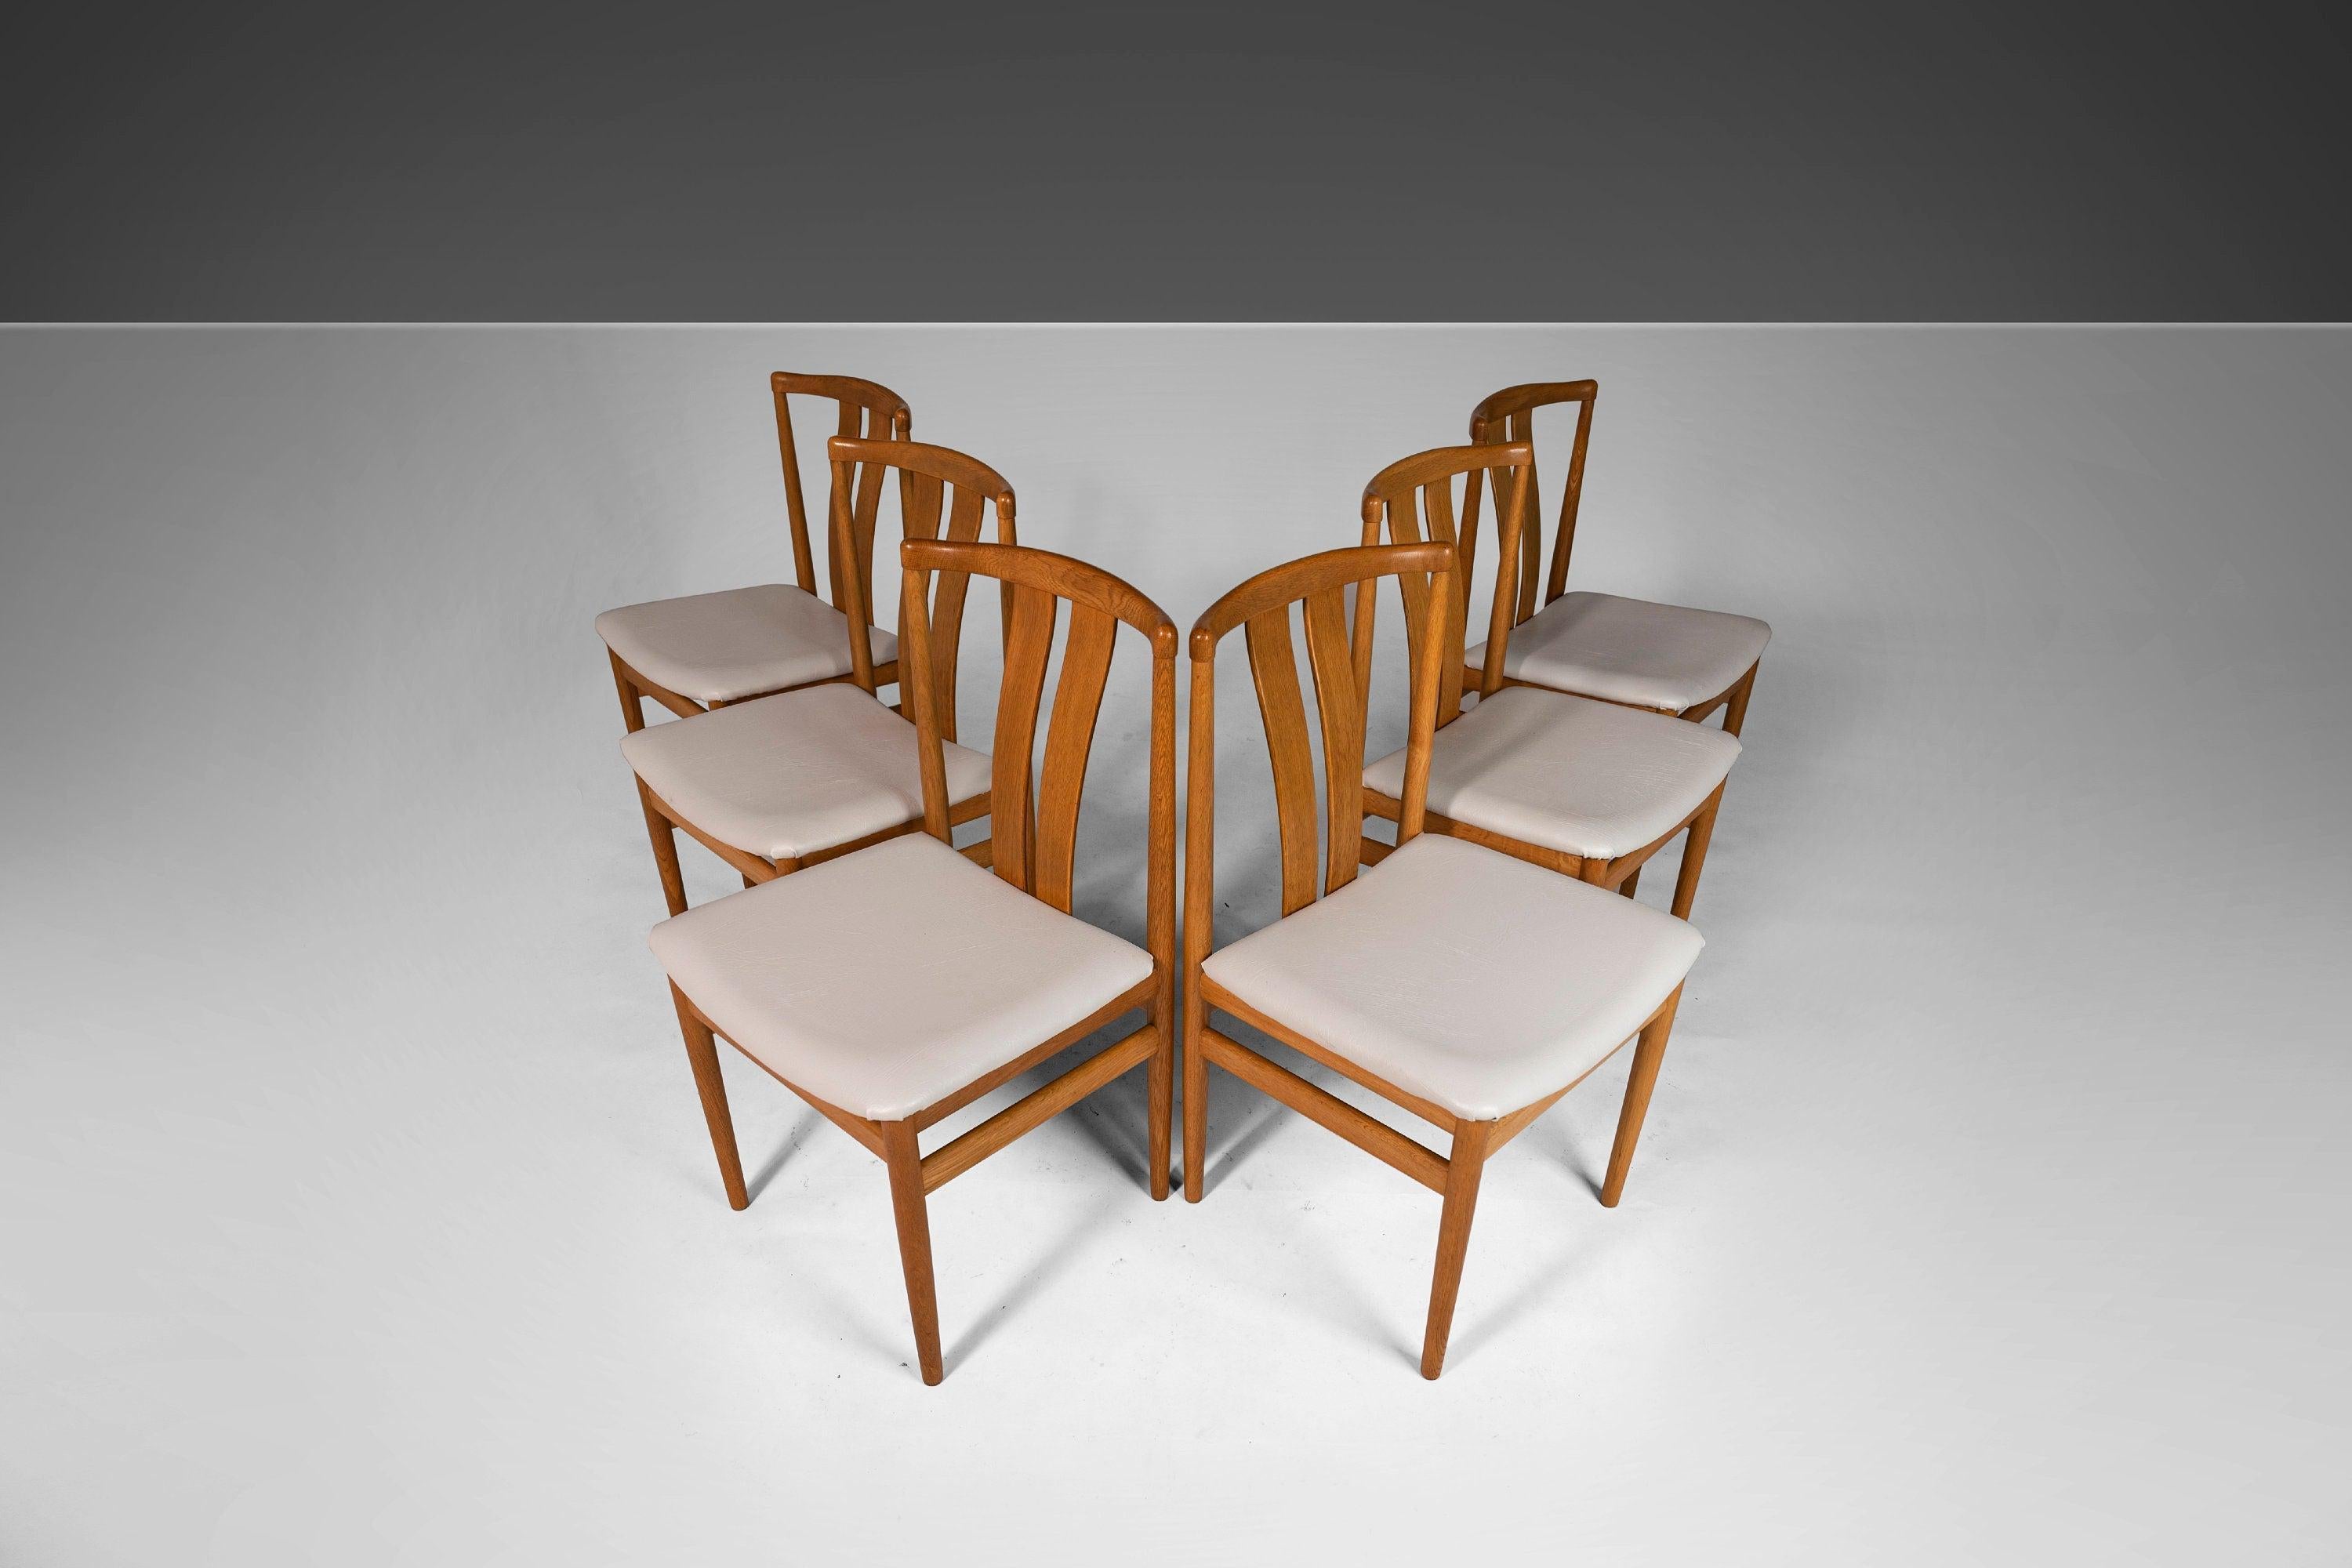 Set of Six (6) Danish Dining Chairs by Vamdrup Stolefabrik in Oak, c. 1970s In Good Condition For Sale In Deland, FL